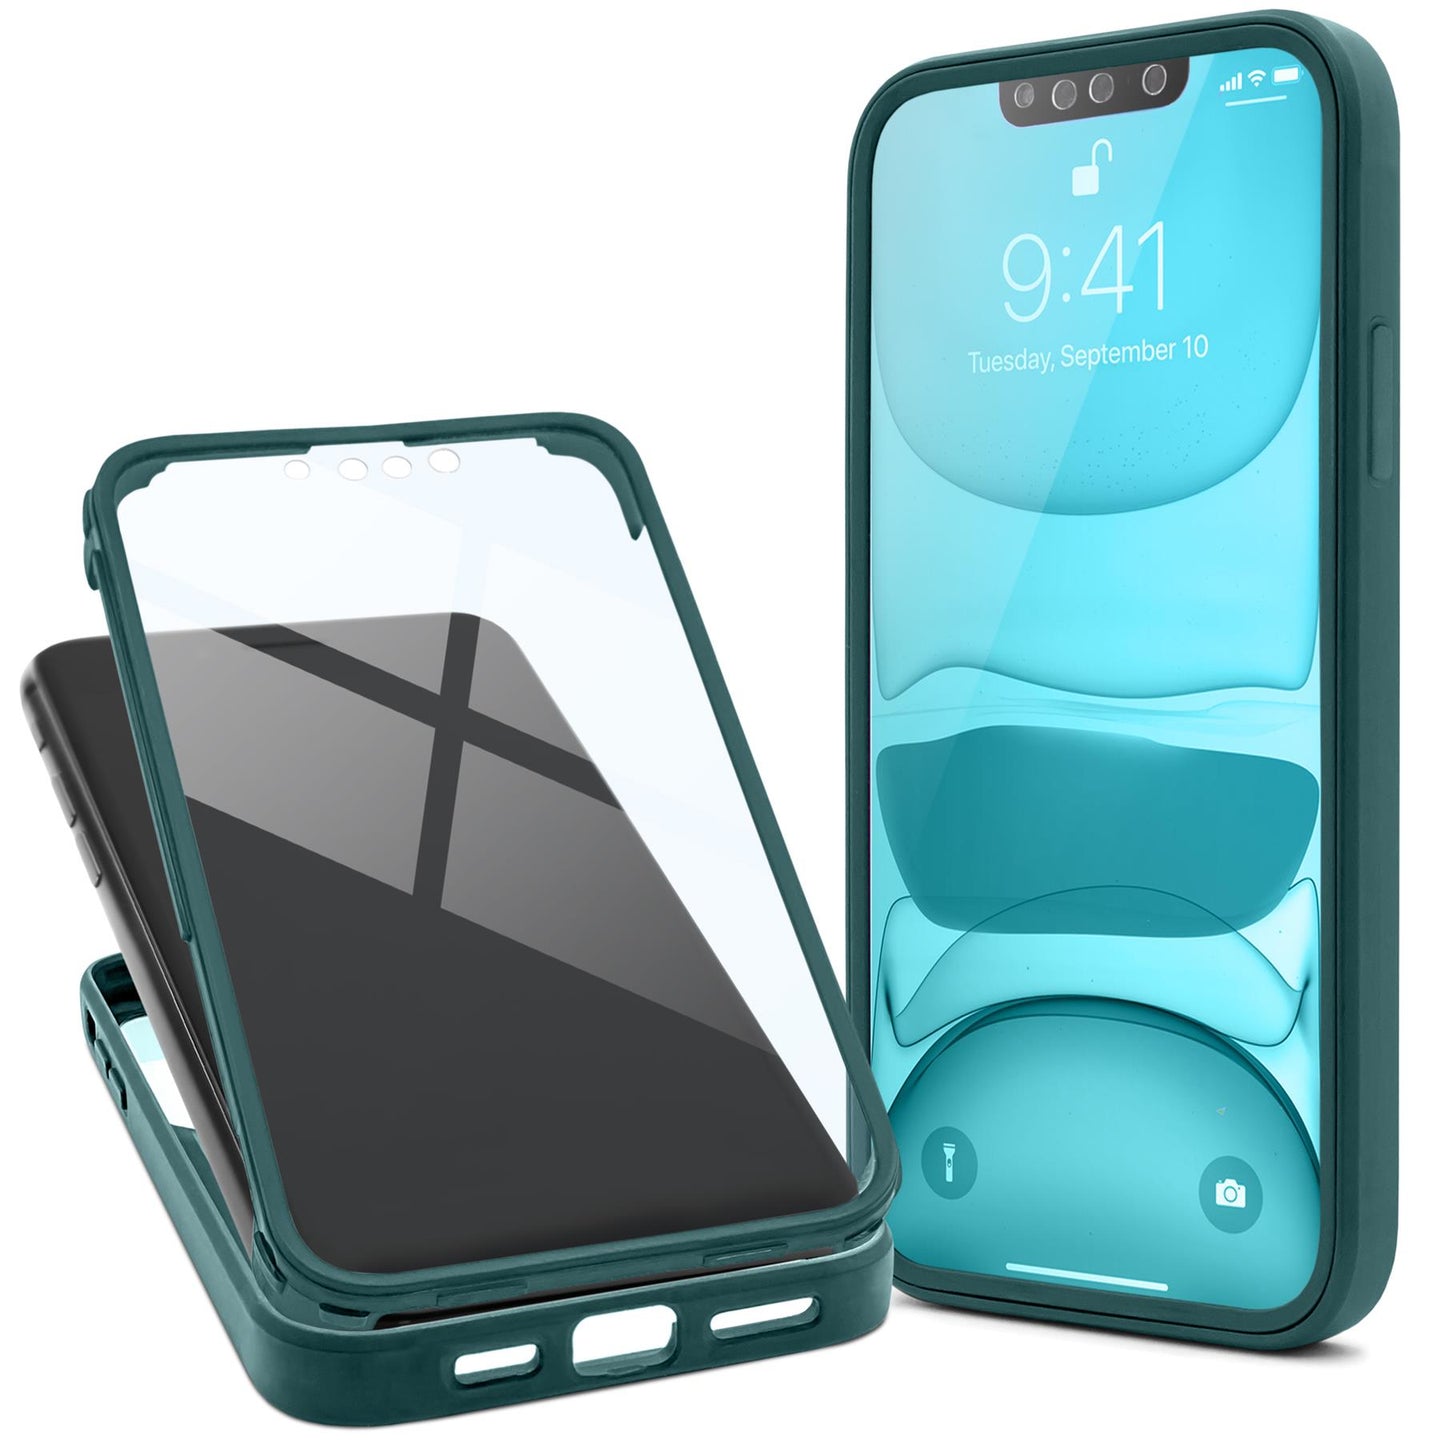 Moozy 360 Case for iPhone 14 - Green Rim Transparent Case, Full Body Double-sided Protection, Cover with Built-in Screen Protector